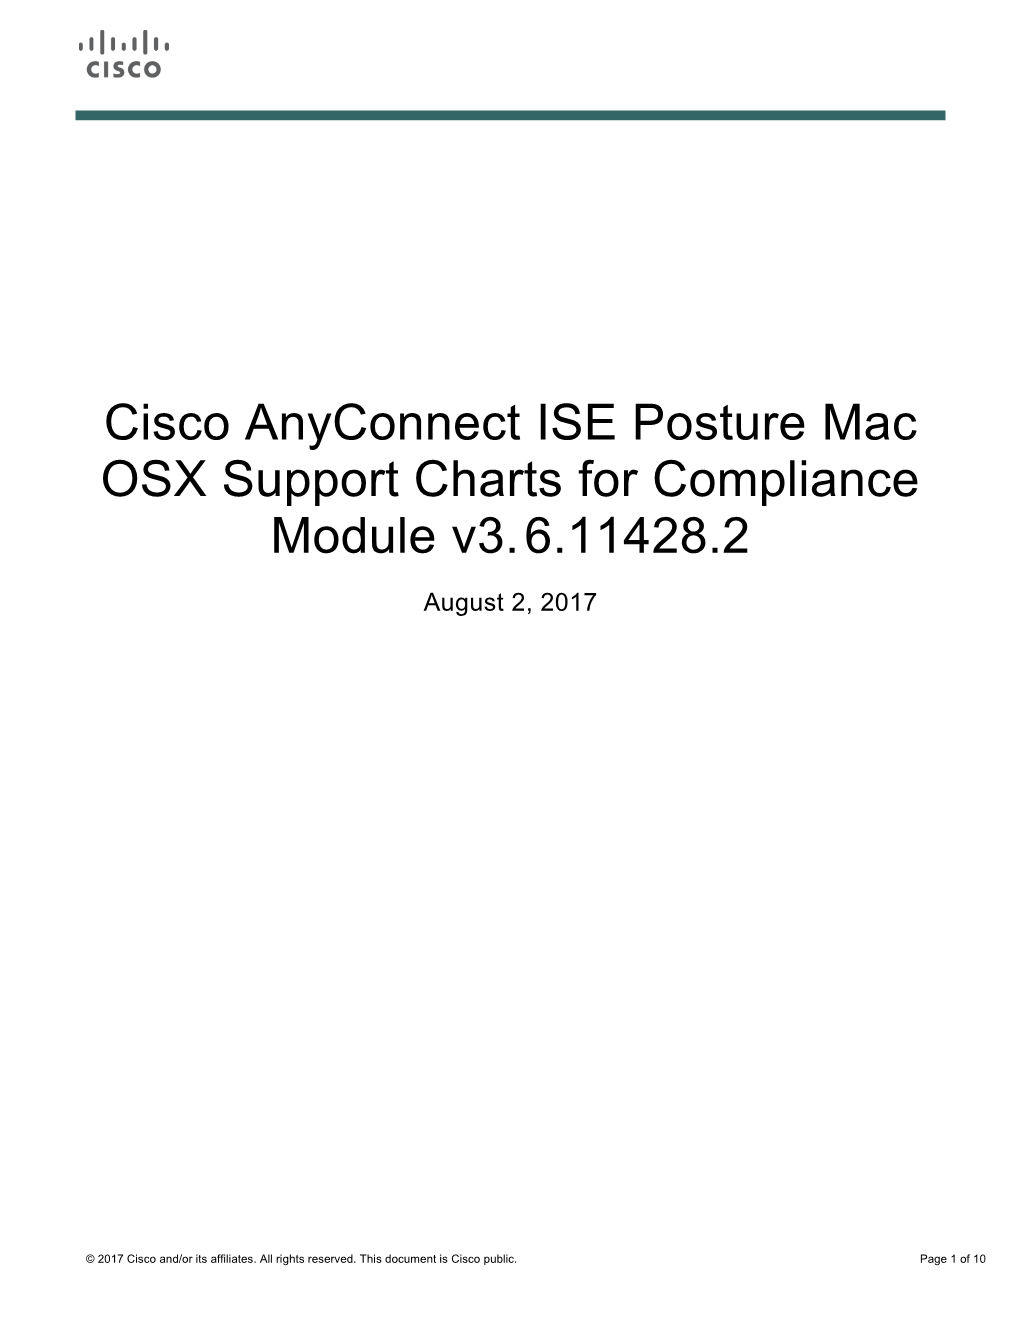 Cisco Anyconnect ISE Posture MAC Support Charts for Compliance